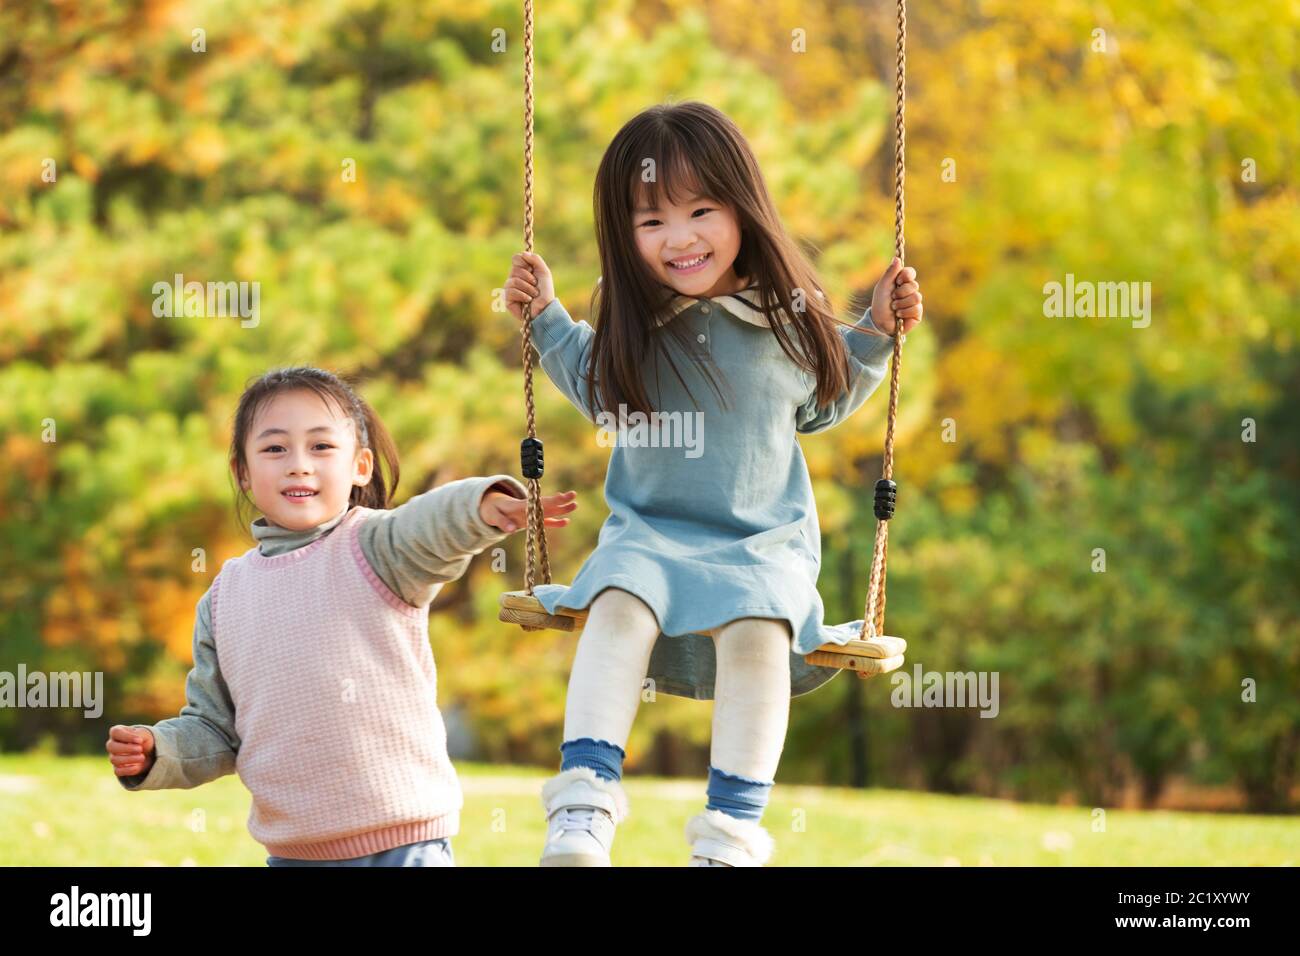 Two girls play on a swing in the park Stock Photo